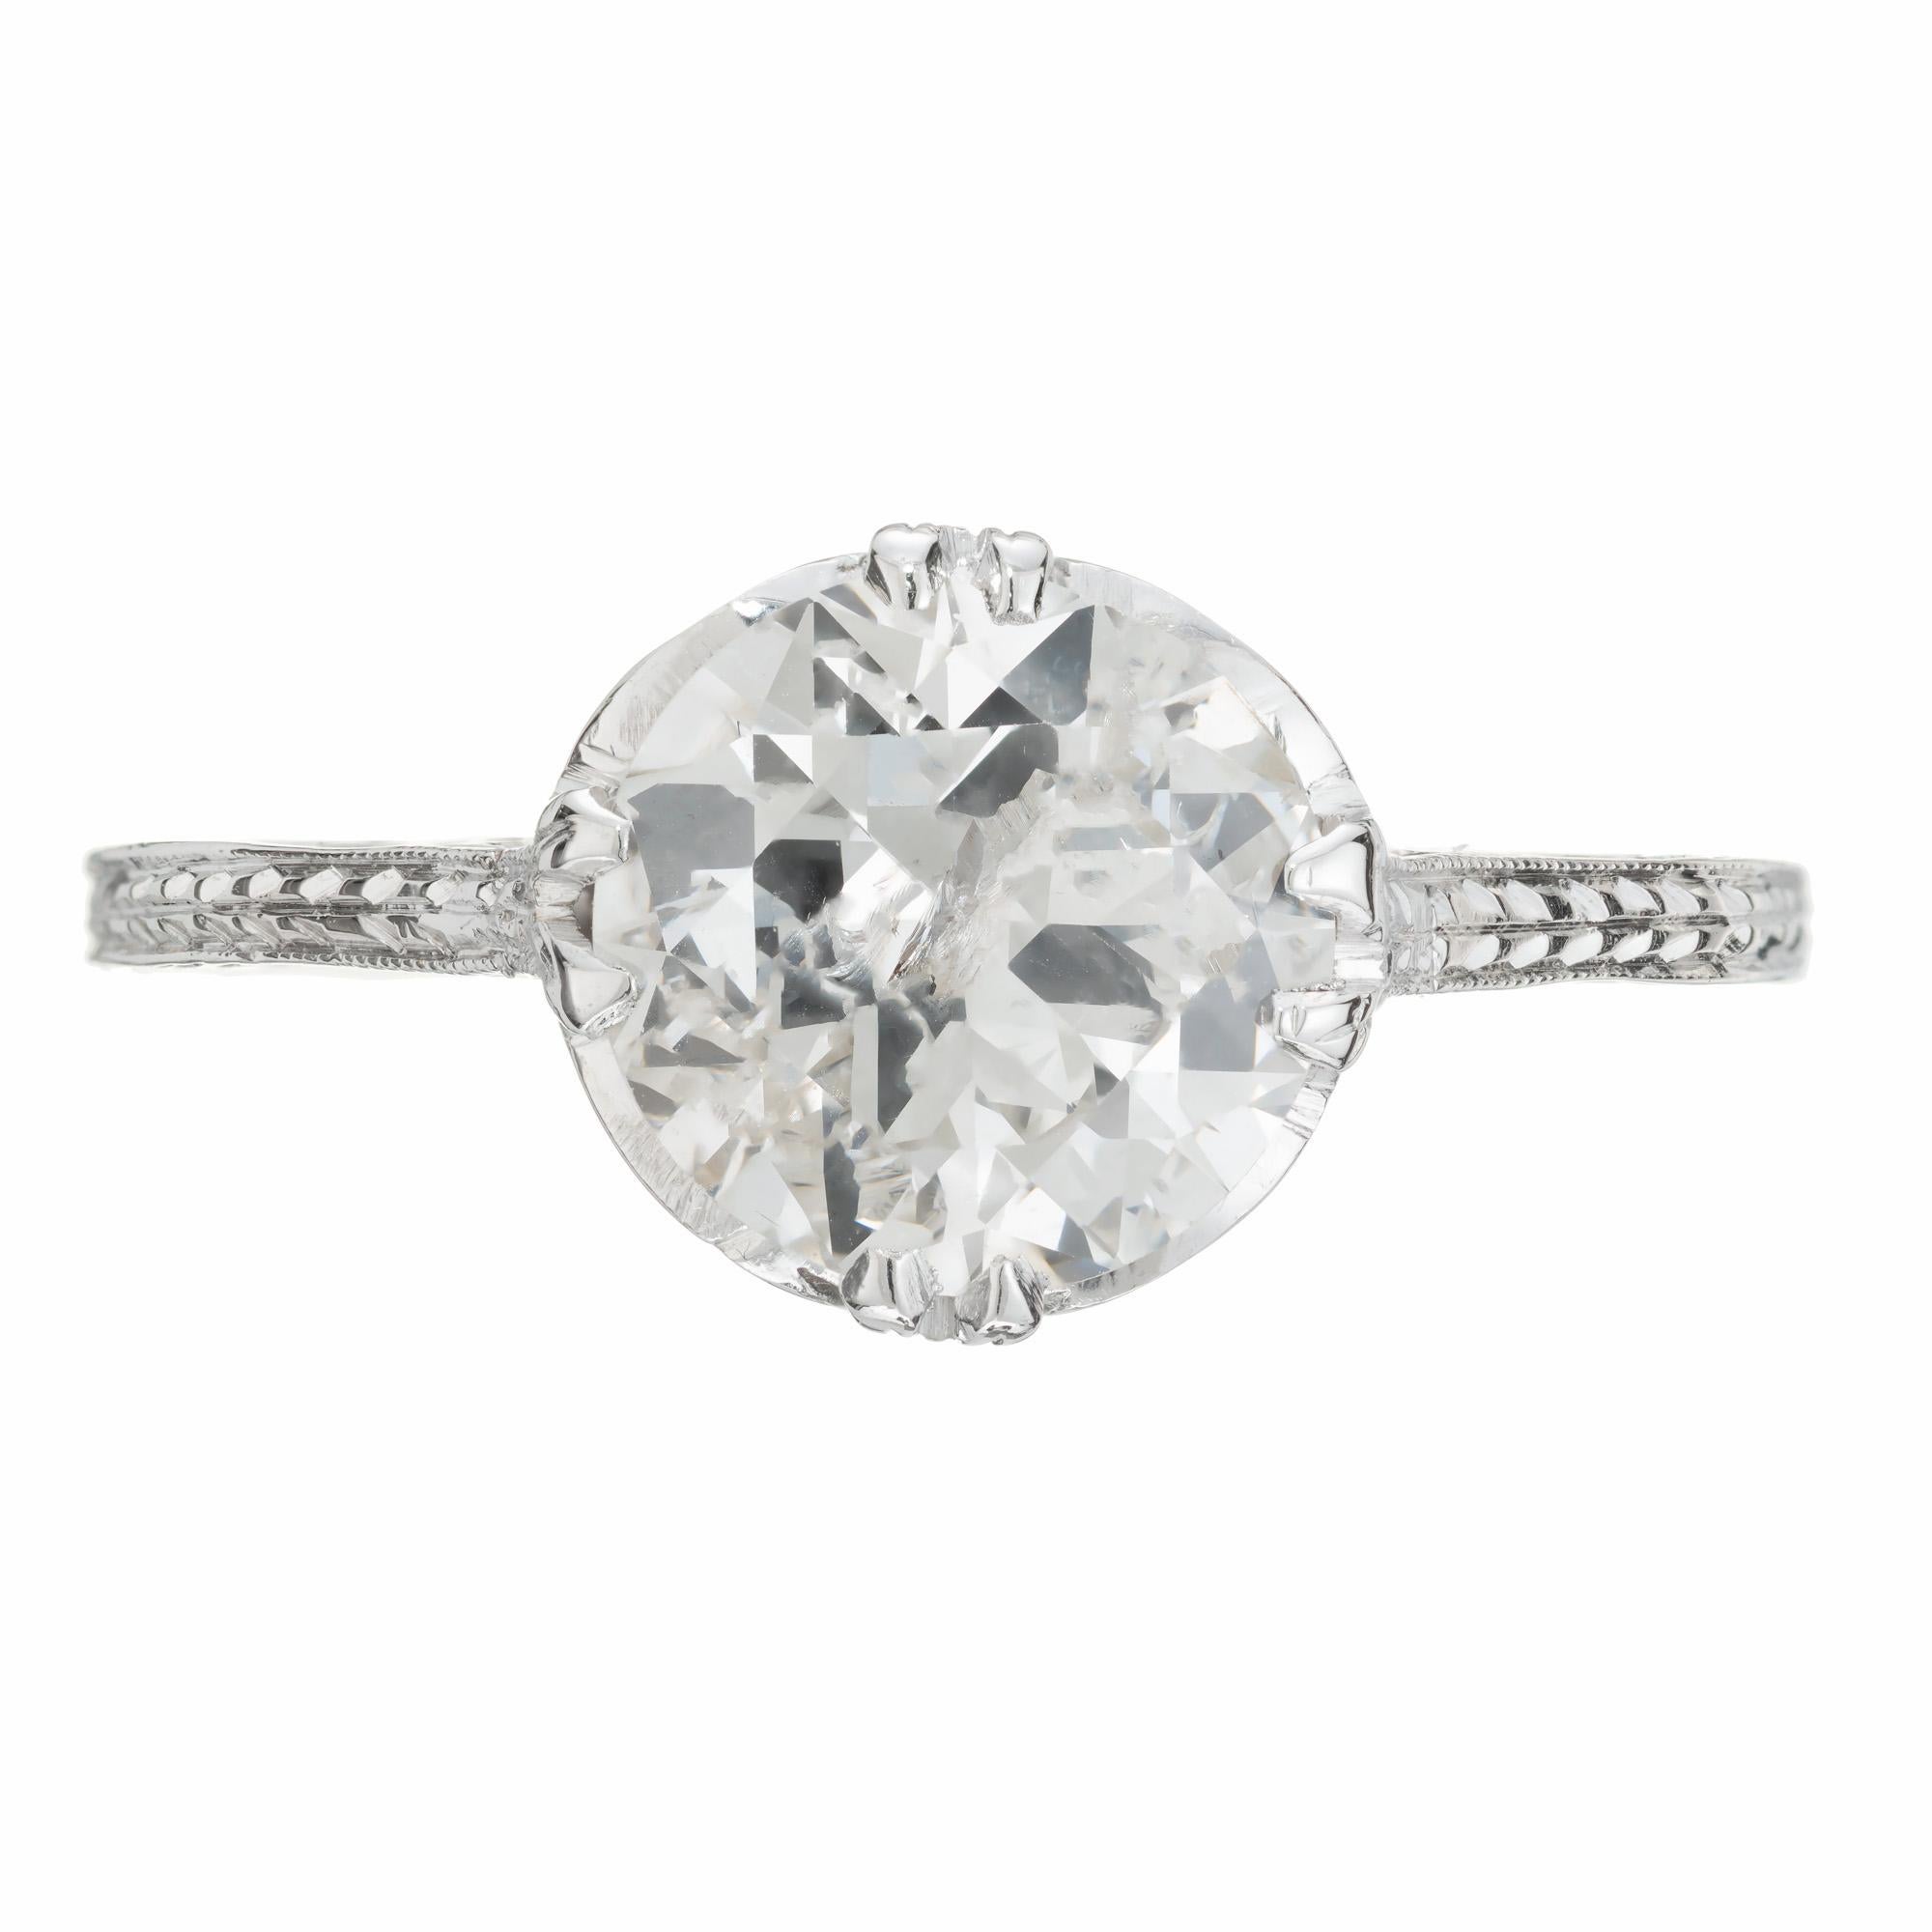 Transitional cut diamond engagement ring. EGL certified 1.80ct center stone set in a handmade 18k white gold engraved setting. Circa 1930's. 

1 transitional cut round diamond, H-I I2 approx. 1.80cts EGL Certificate # 400154749D
Size 6.25 and